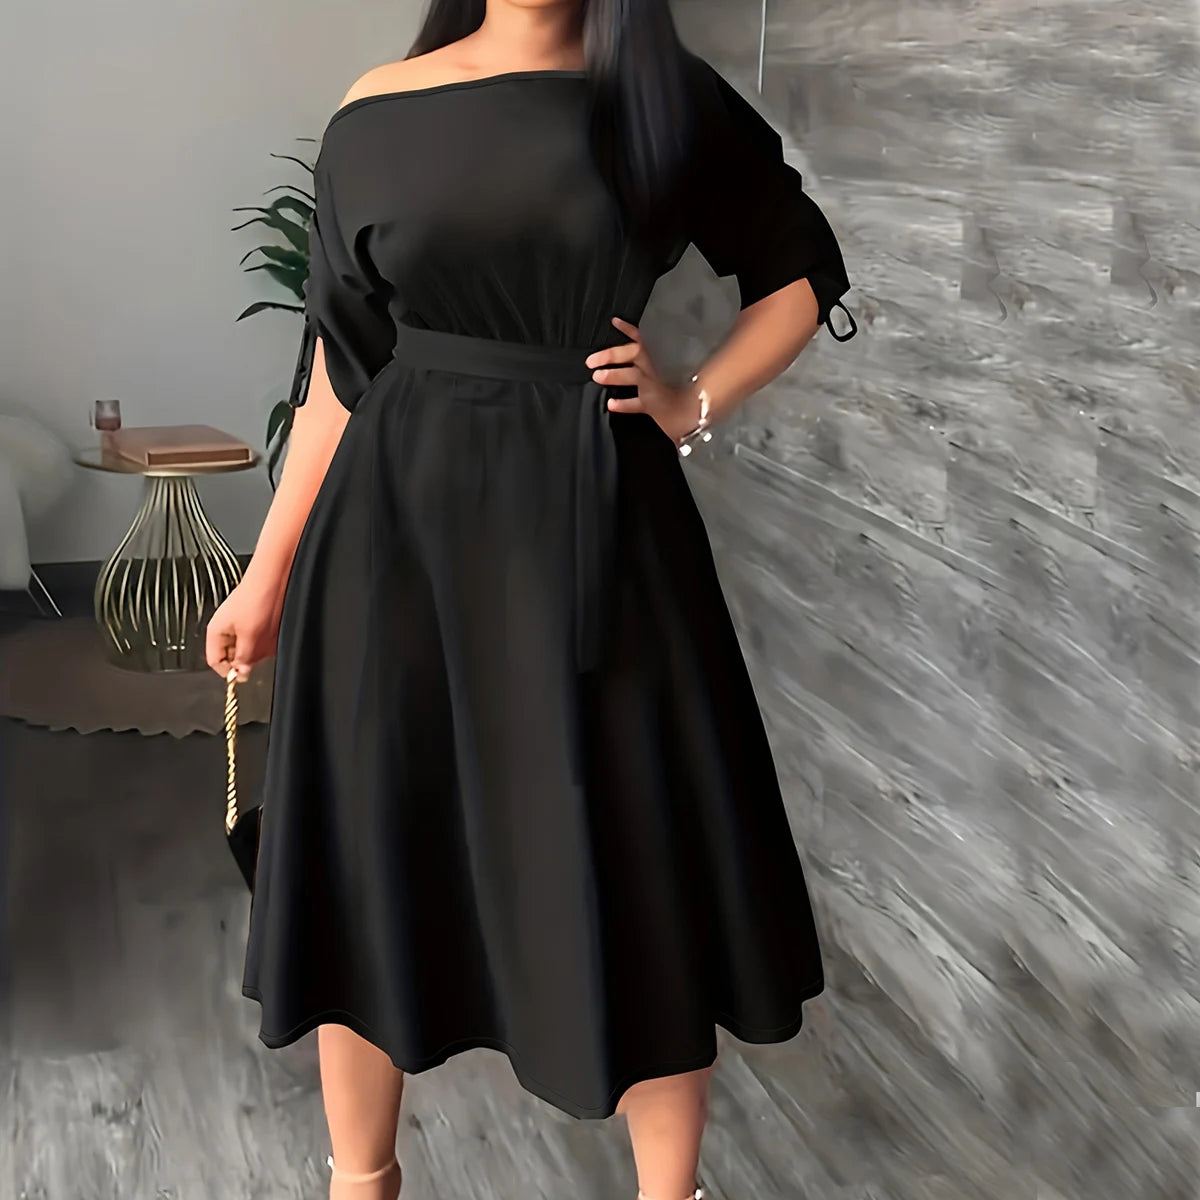 One-piece slim fit and calf drawstring trim dress with off-the-shoulder slightly long sleeves in solid color plus size